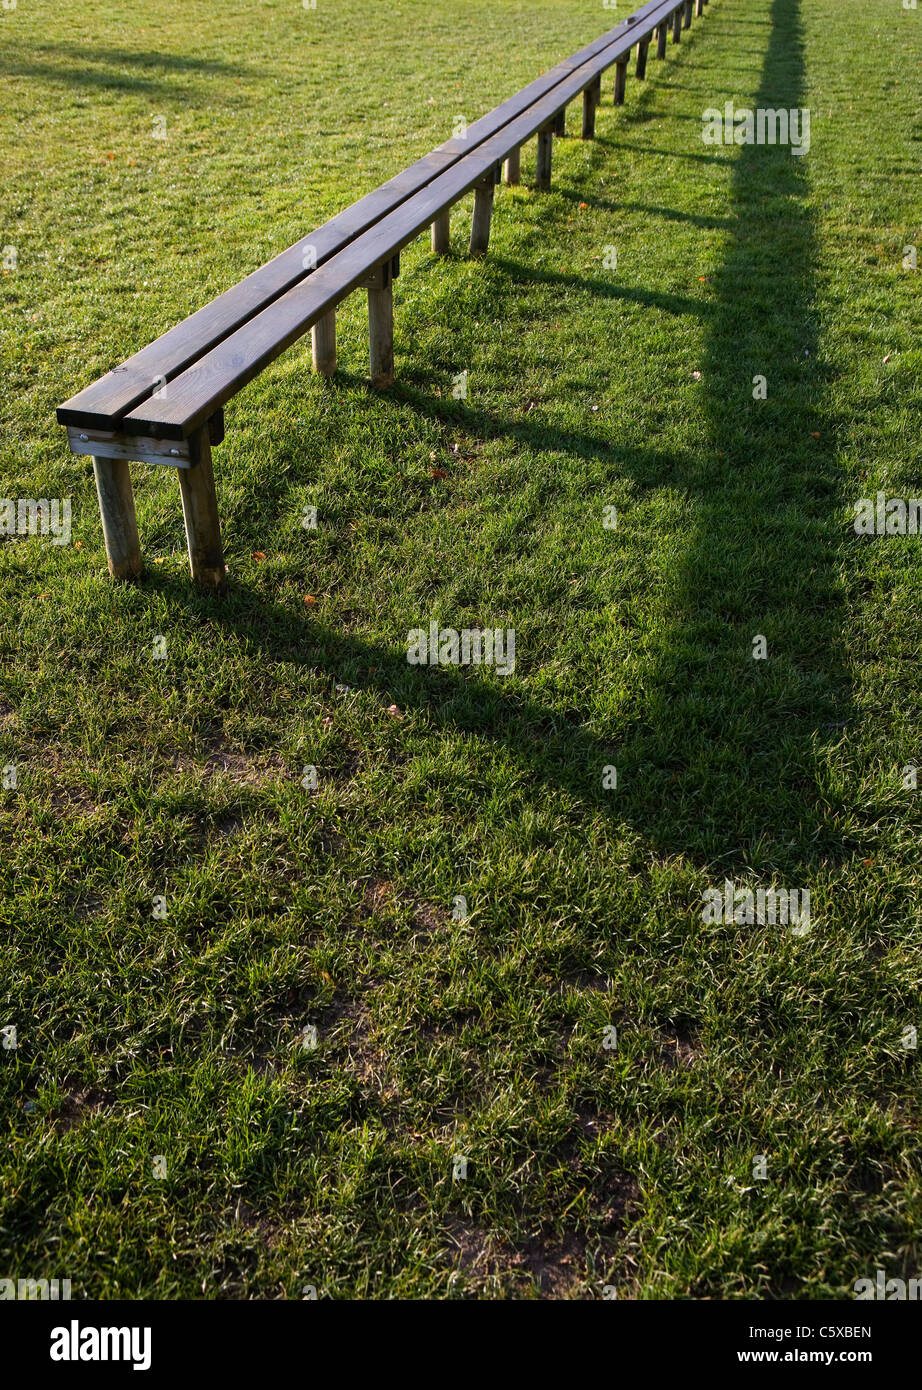 Sports field and seat bench Stock Photo